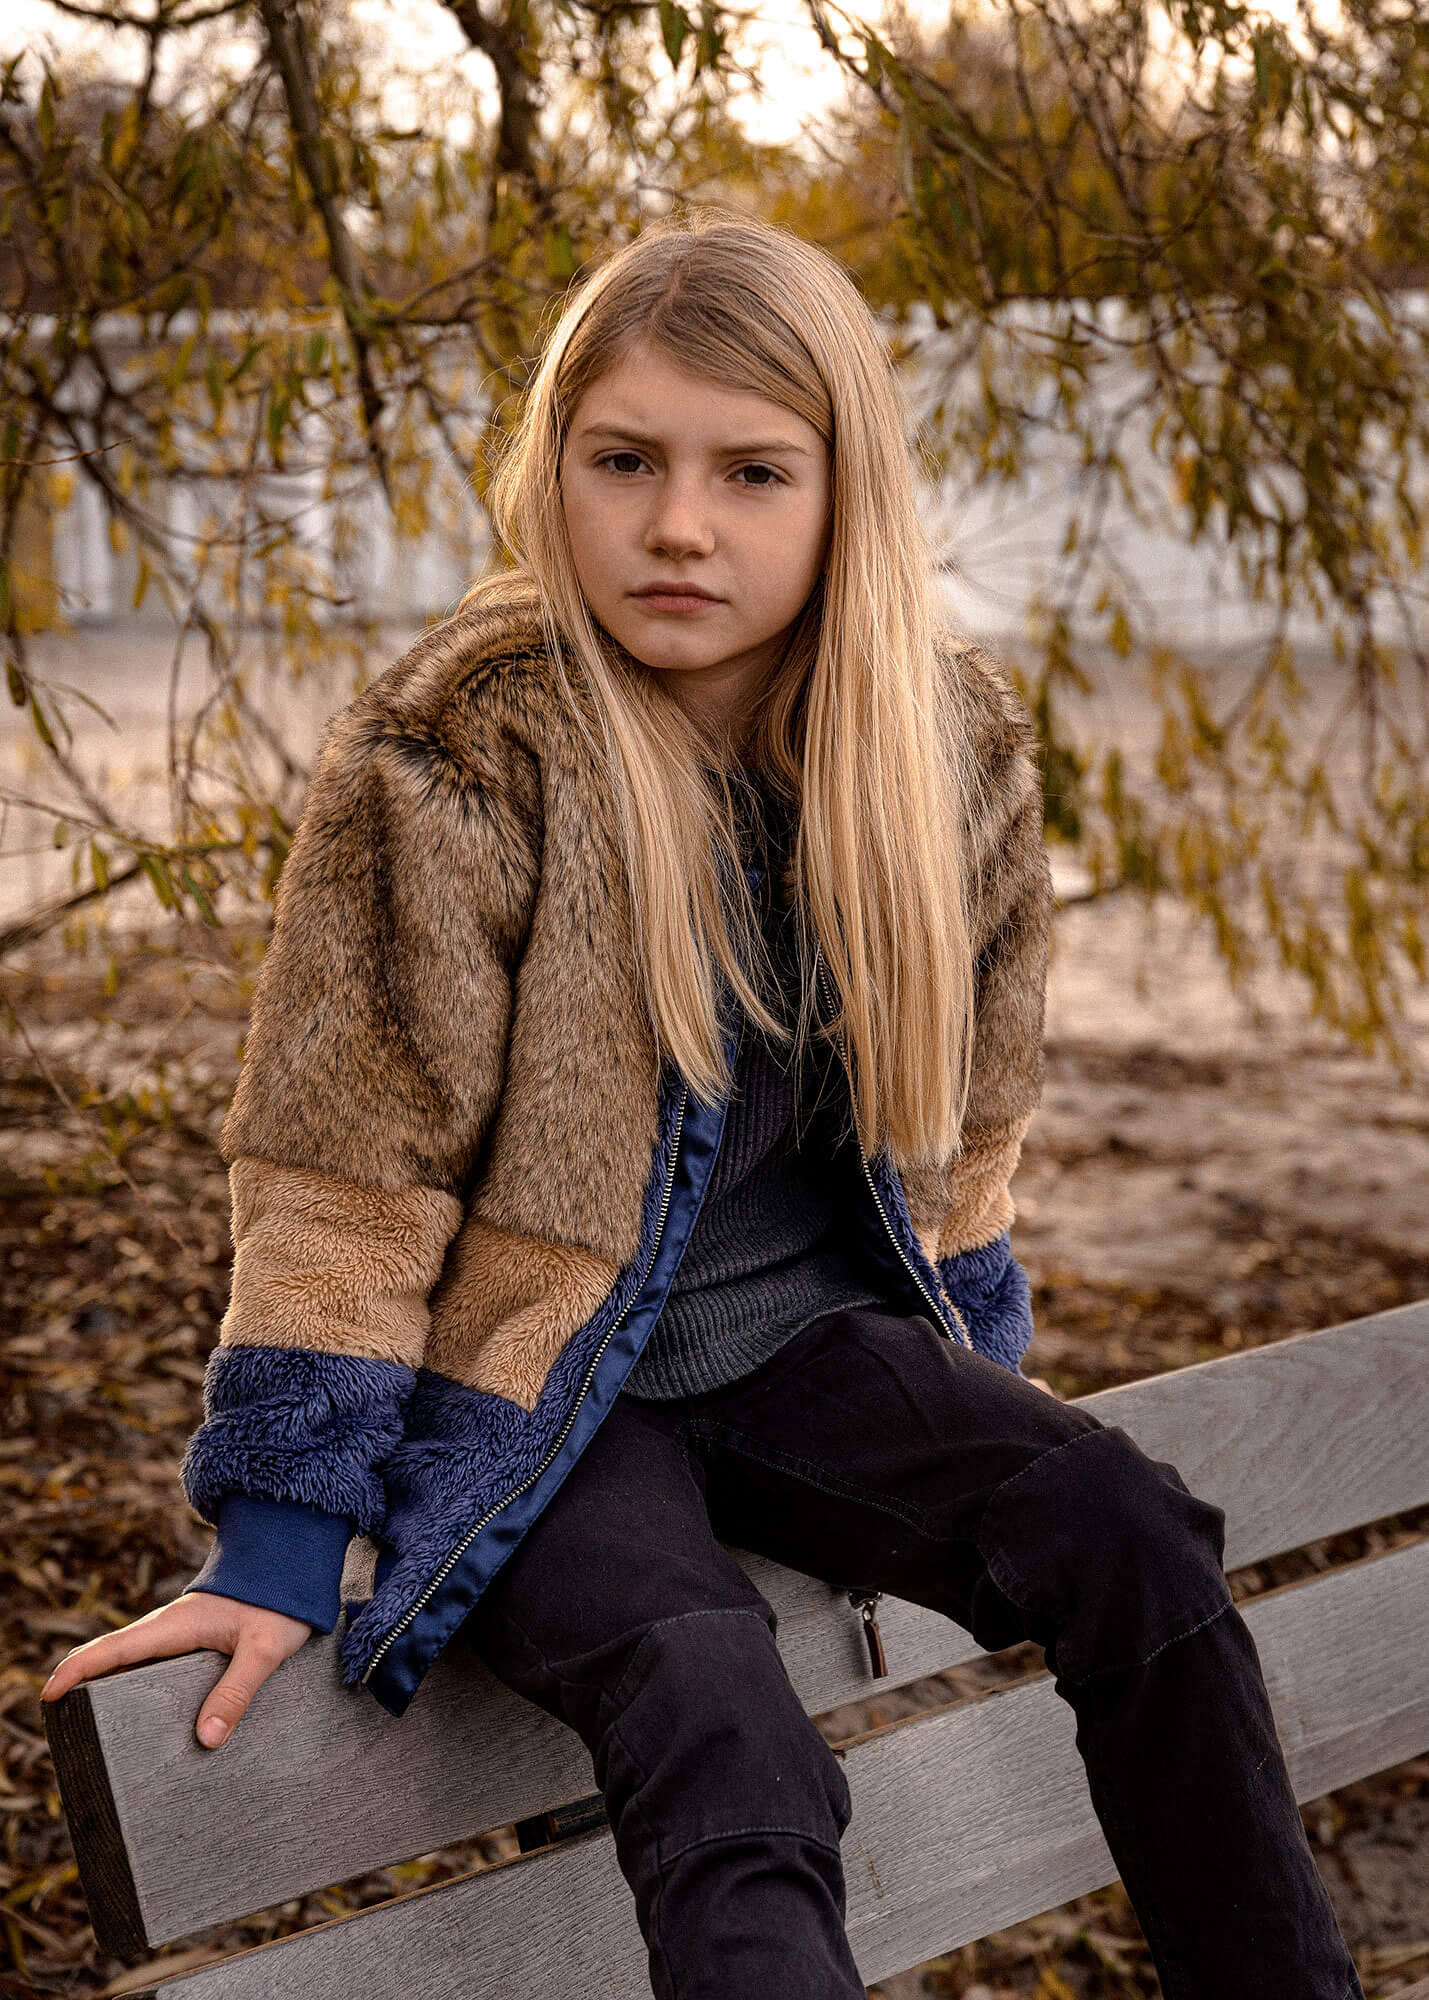 Kid posing on a bench, autumn dressed